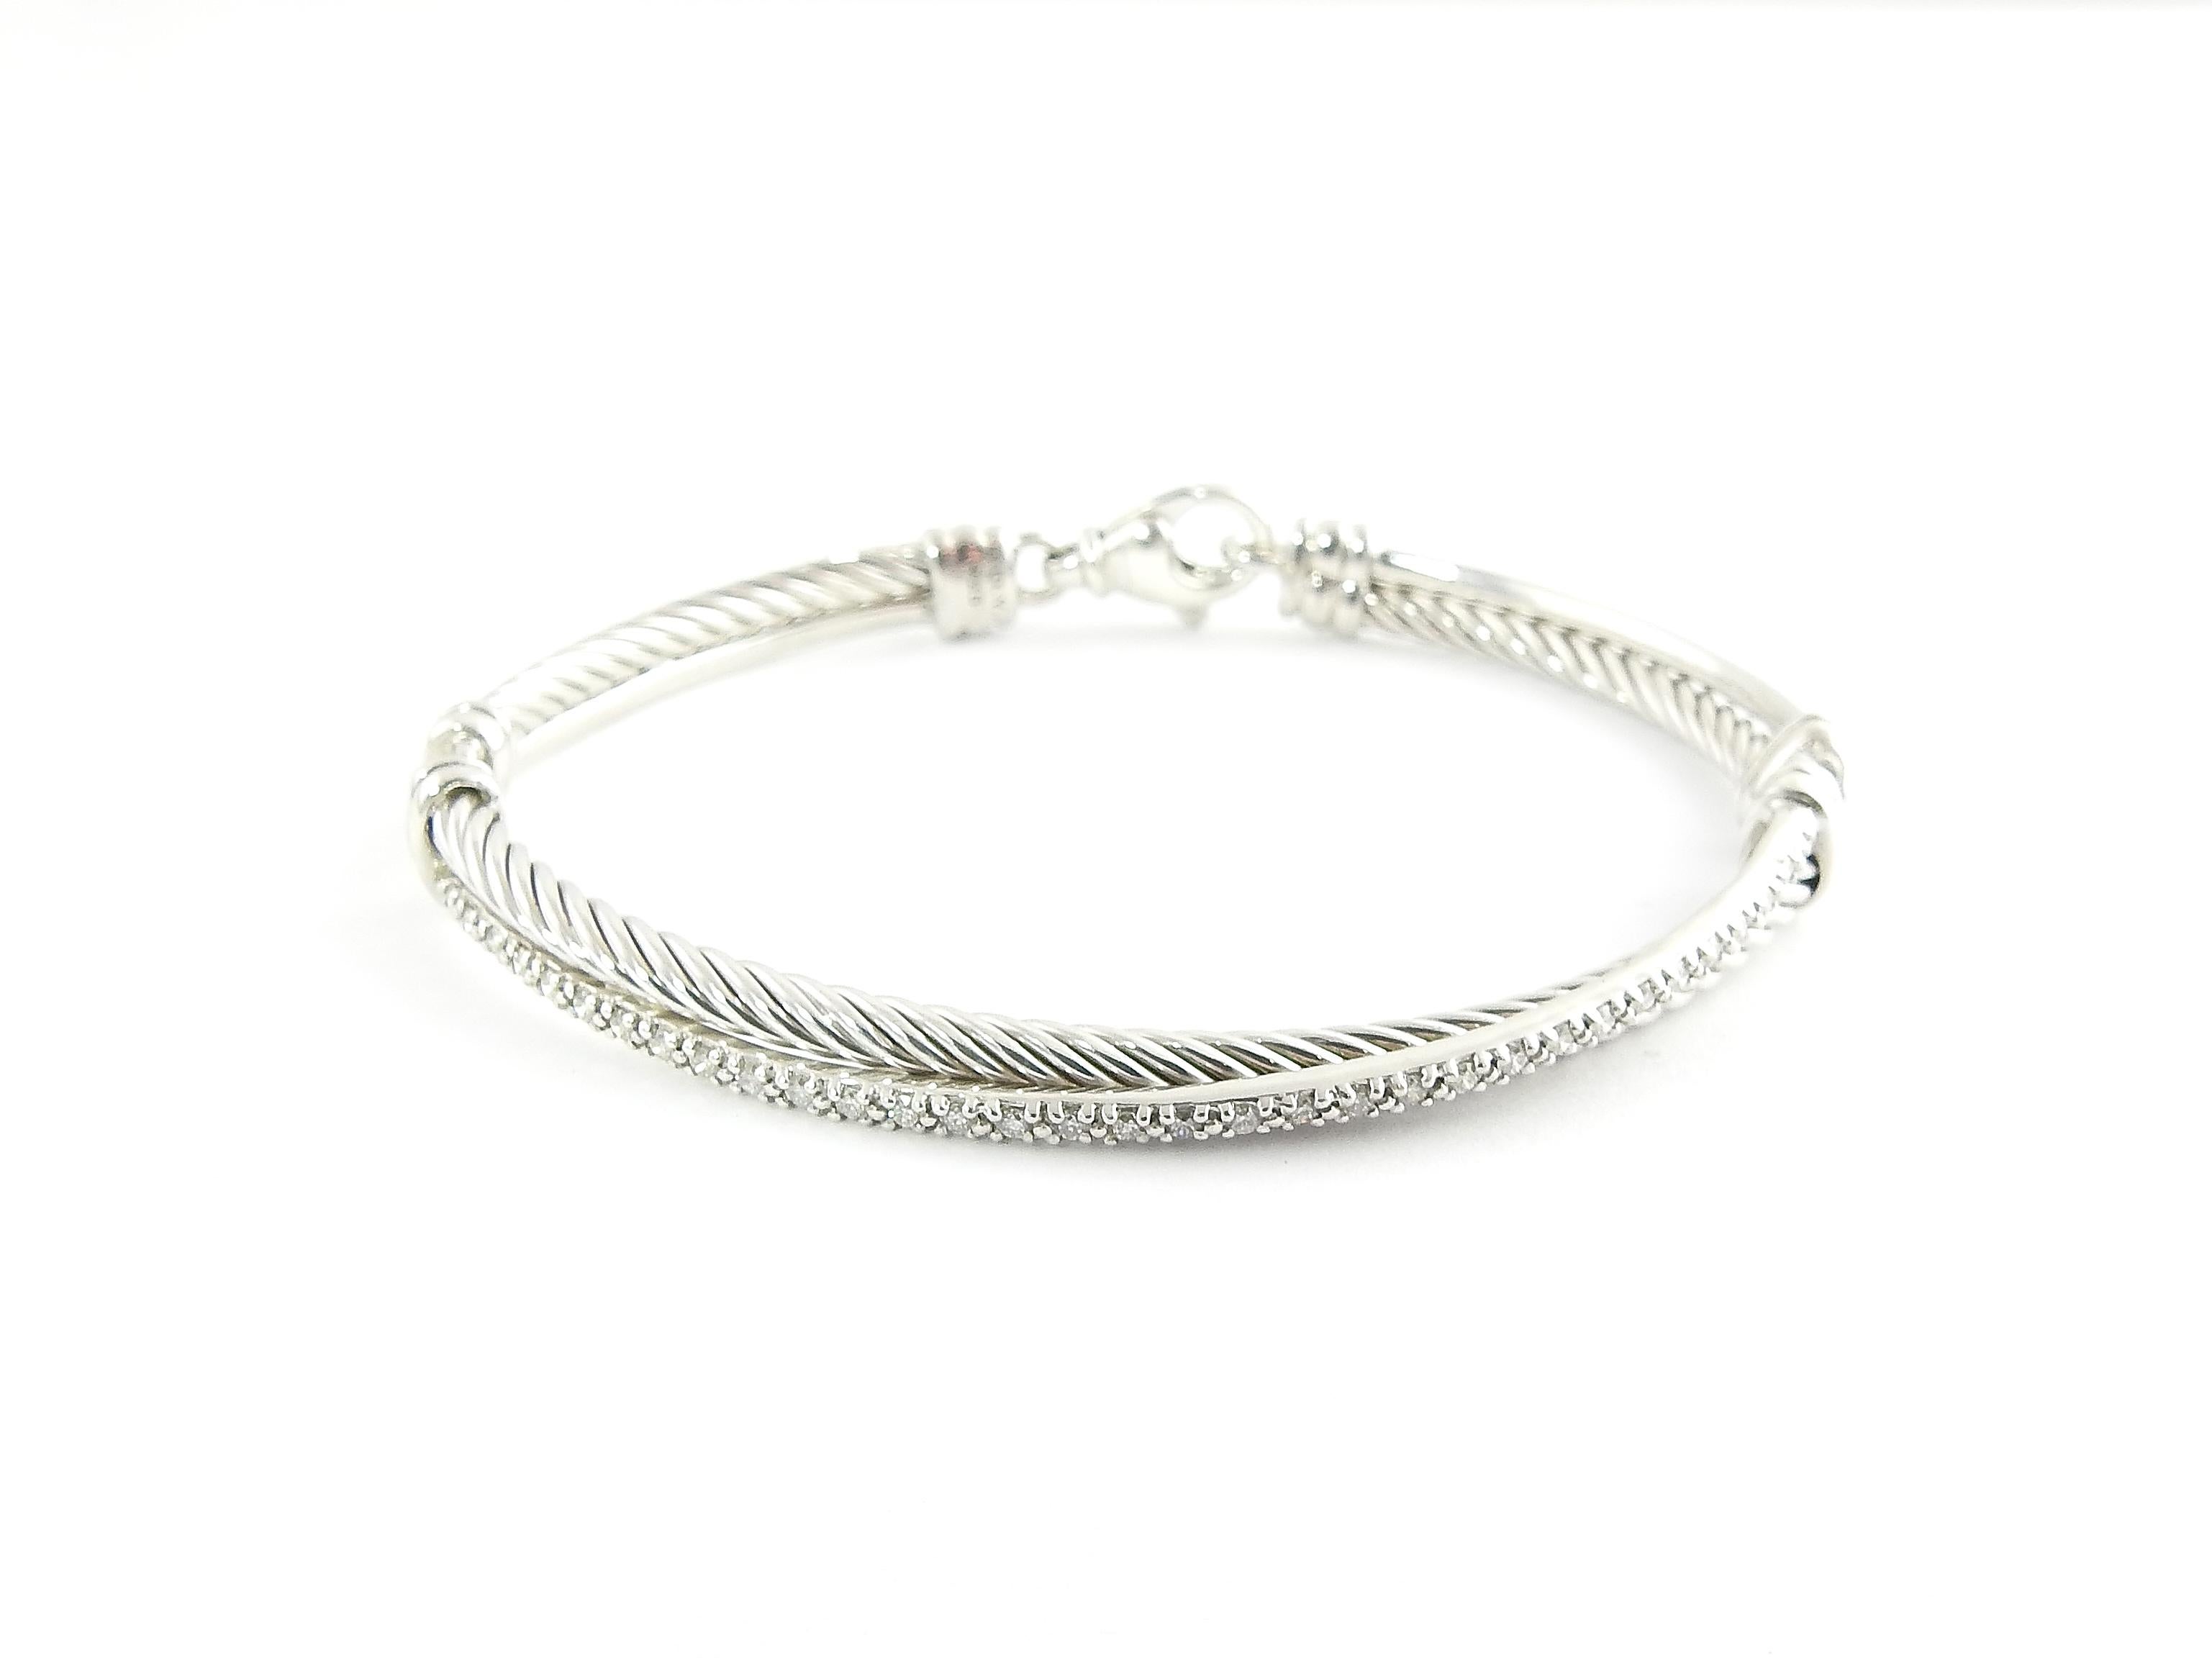 David Yurman Sterling Silver and Diamond Crossover Cable Bracelet

This authentic David Yurman bracelet is approx. 6.5